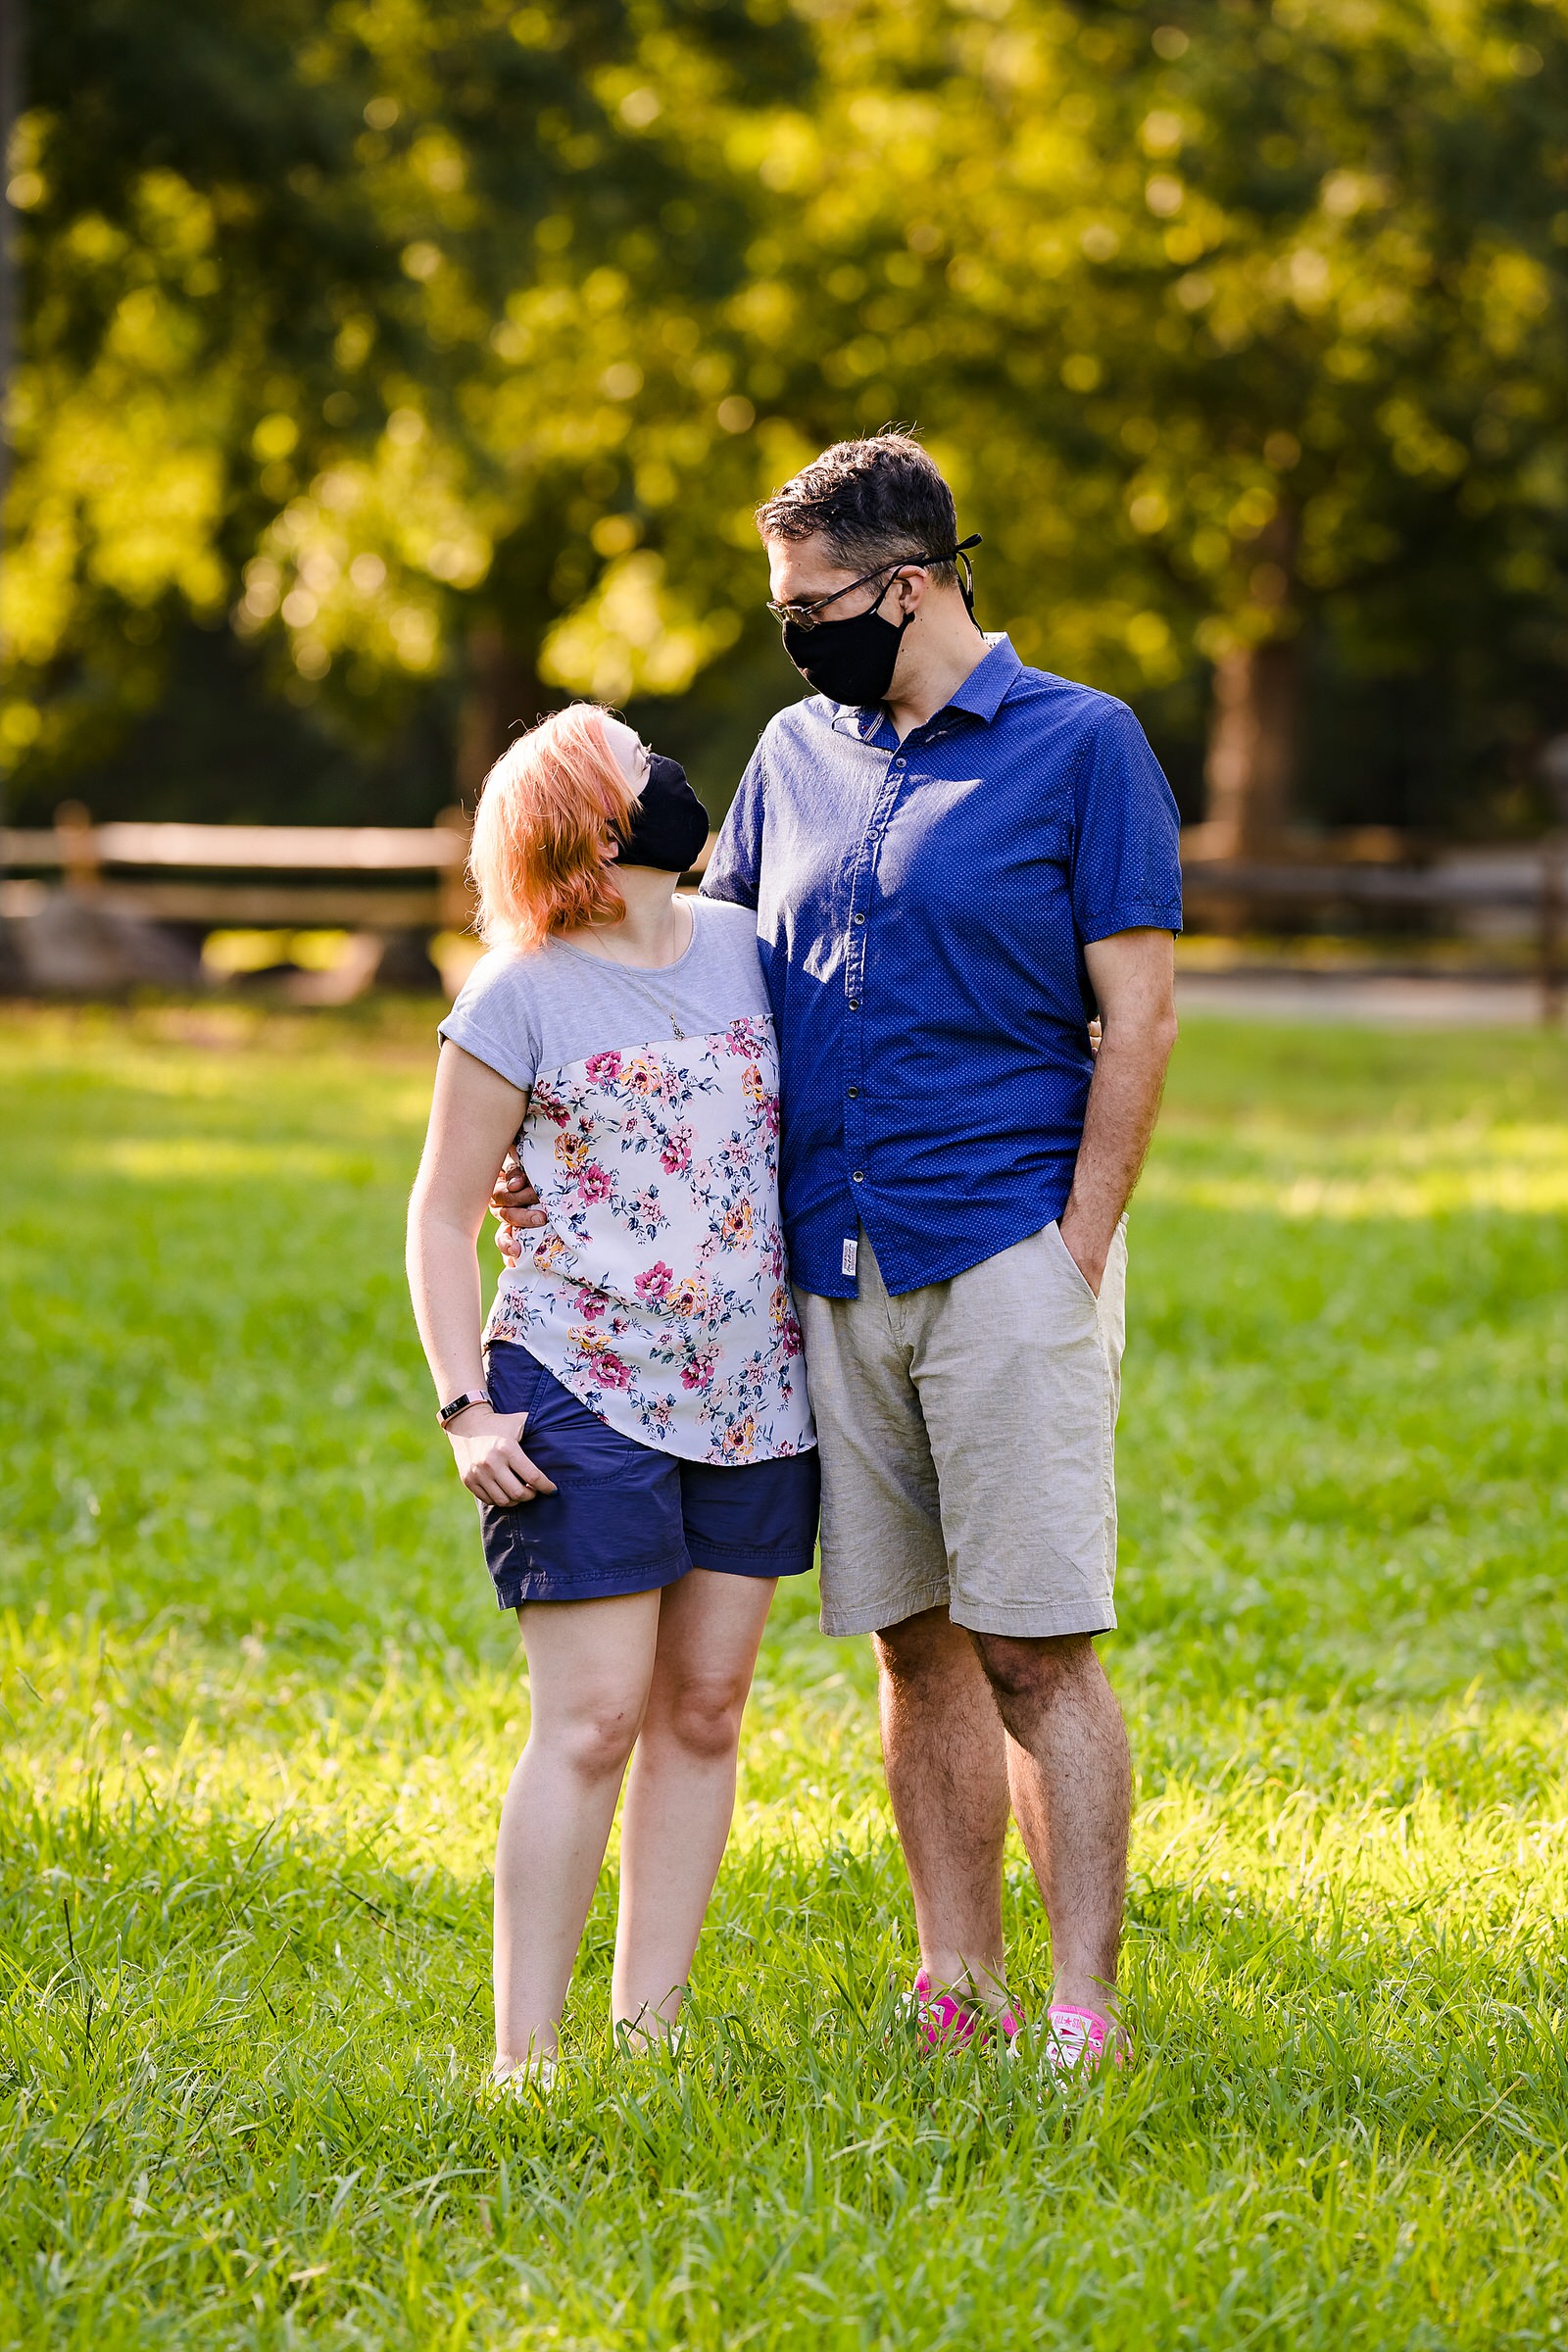 A man and a woman, both wearing Covid19 masks, look at one another during their Durham engagement photo session